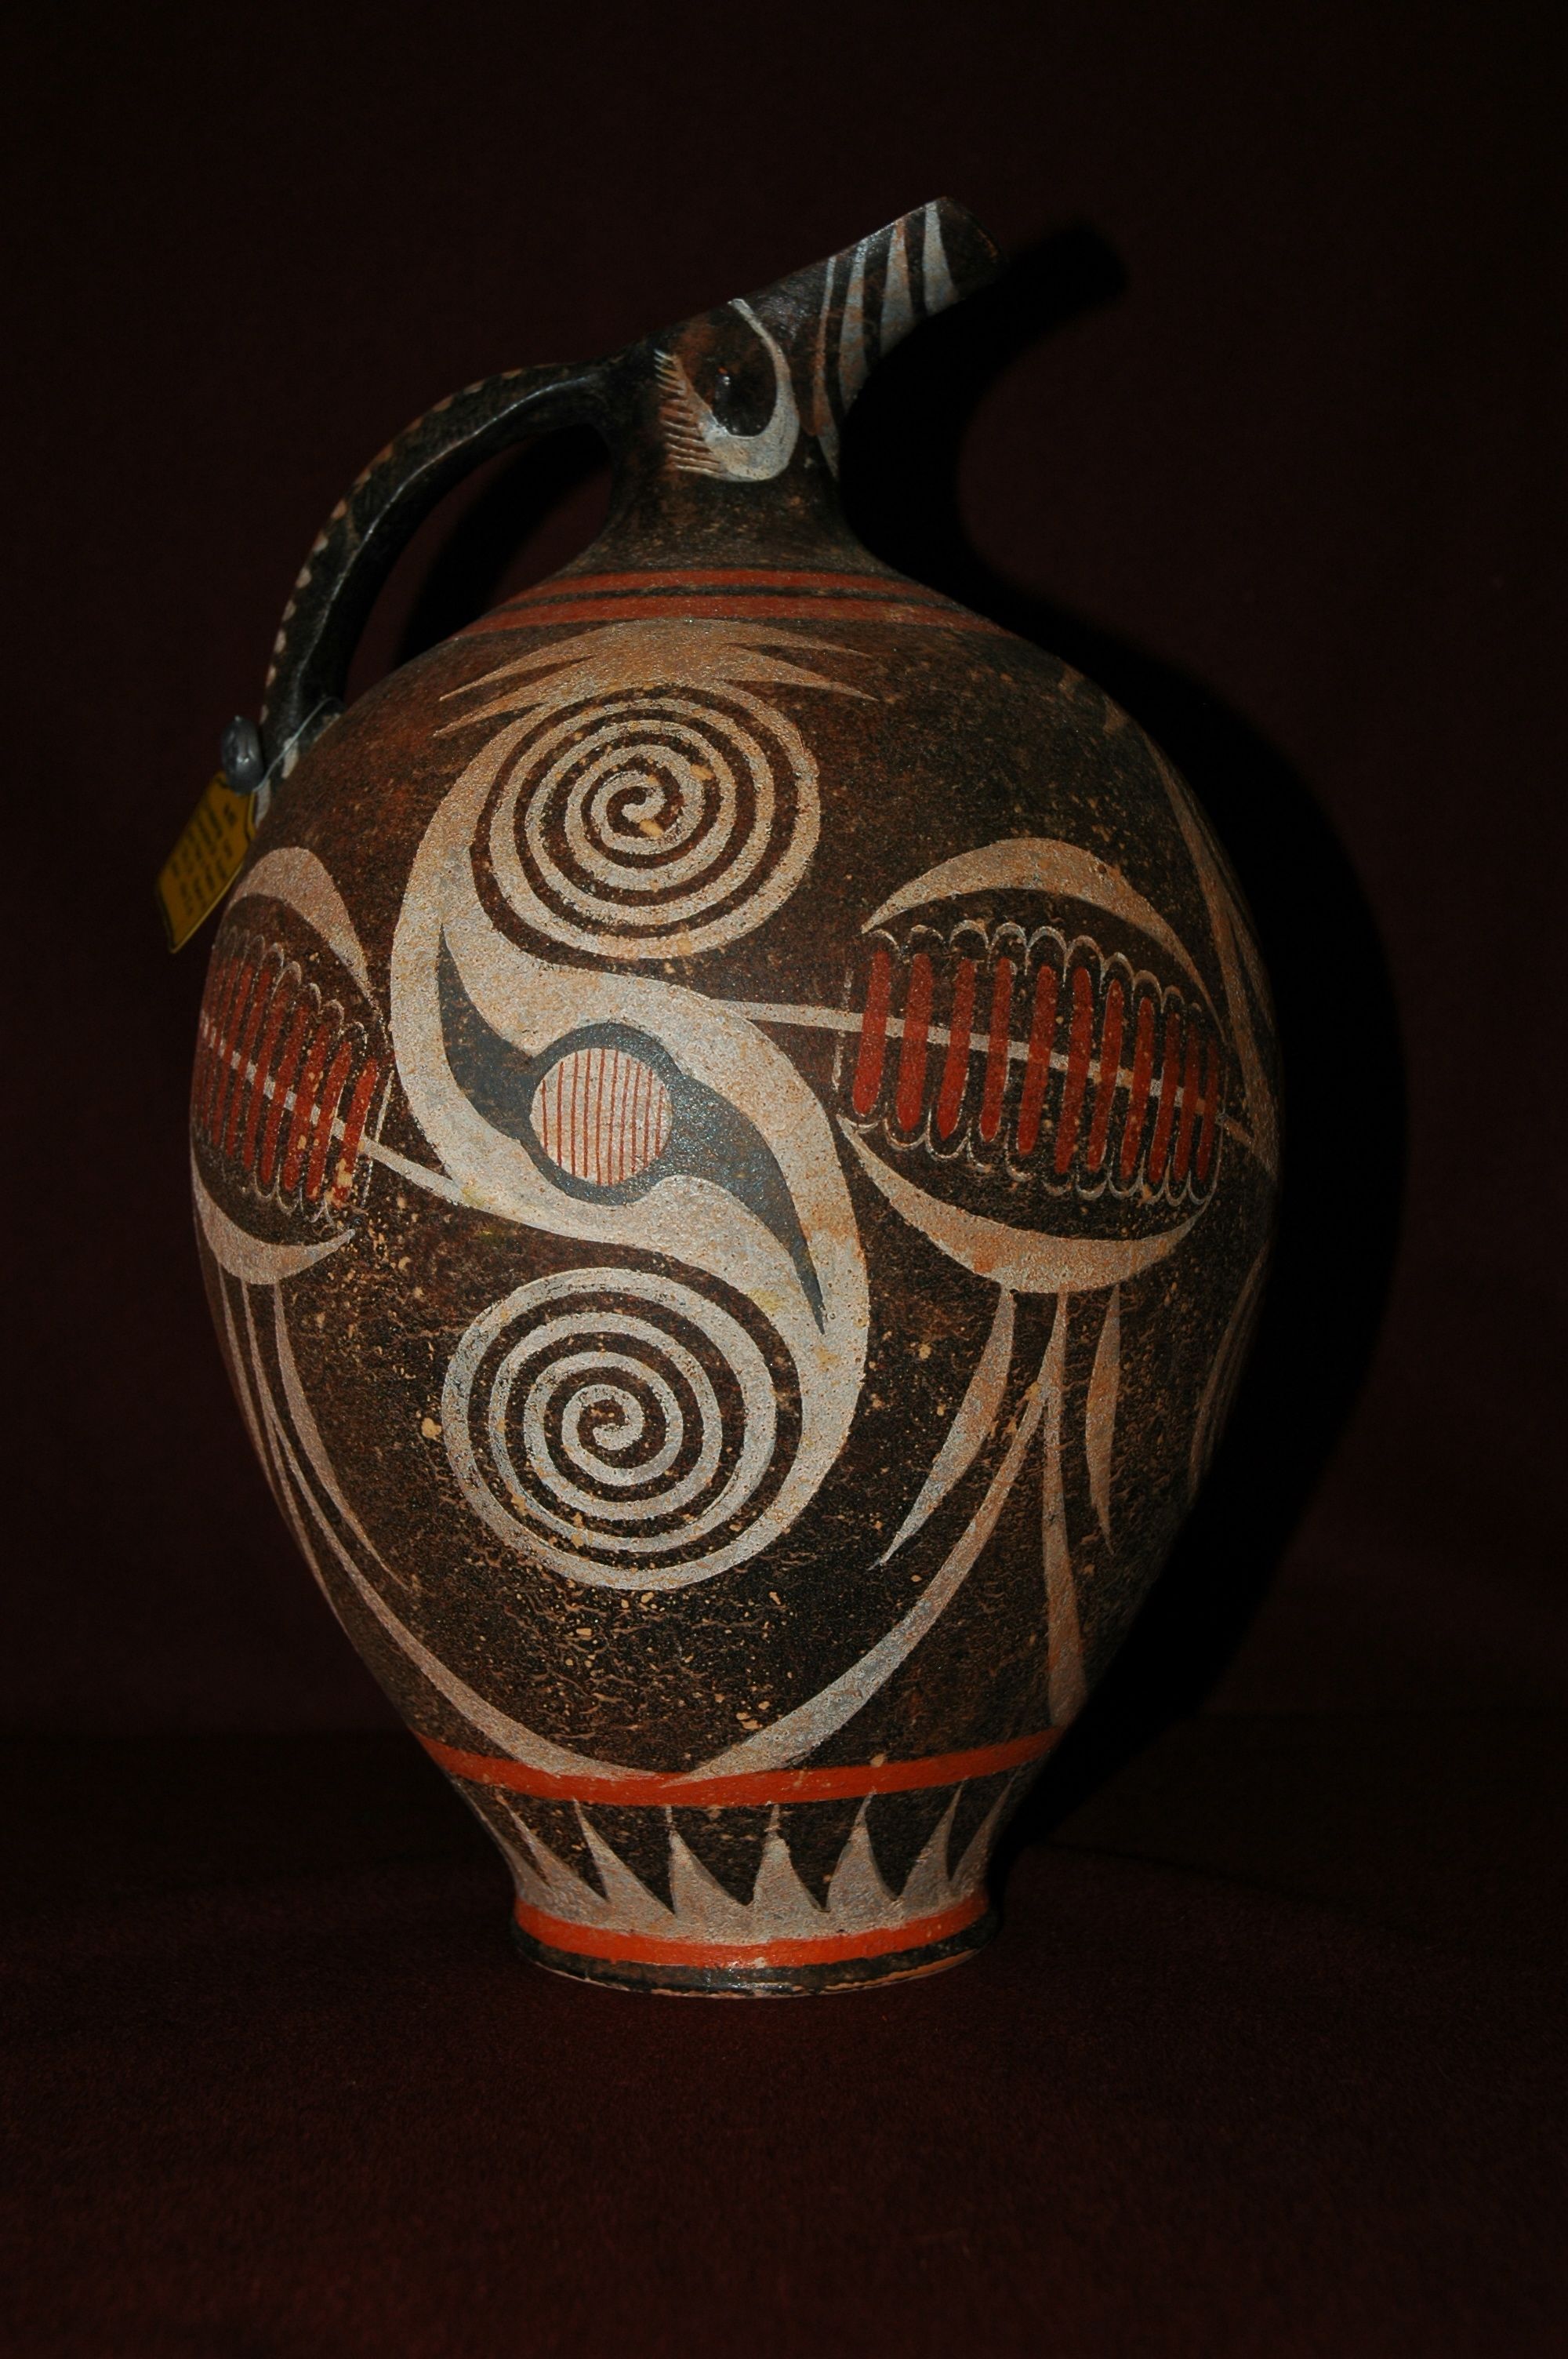 Replica of a Kamares Ware Jug
from the palace of Knossos on Crete